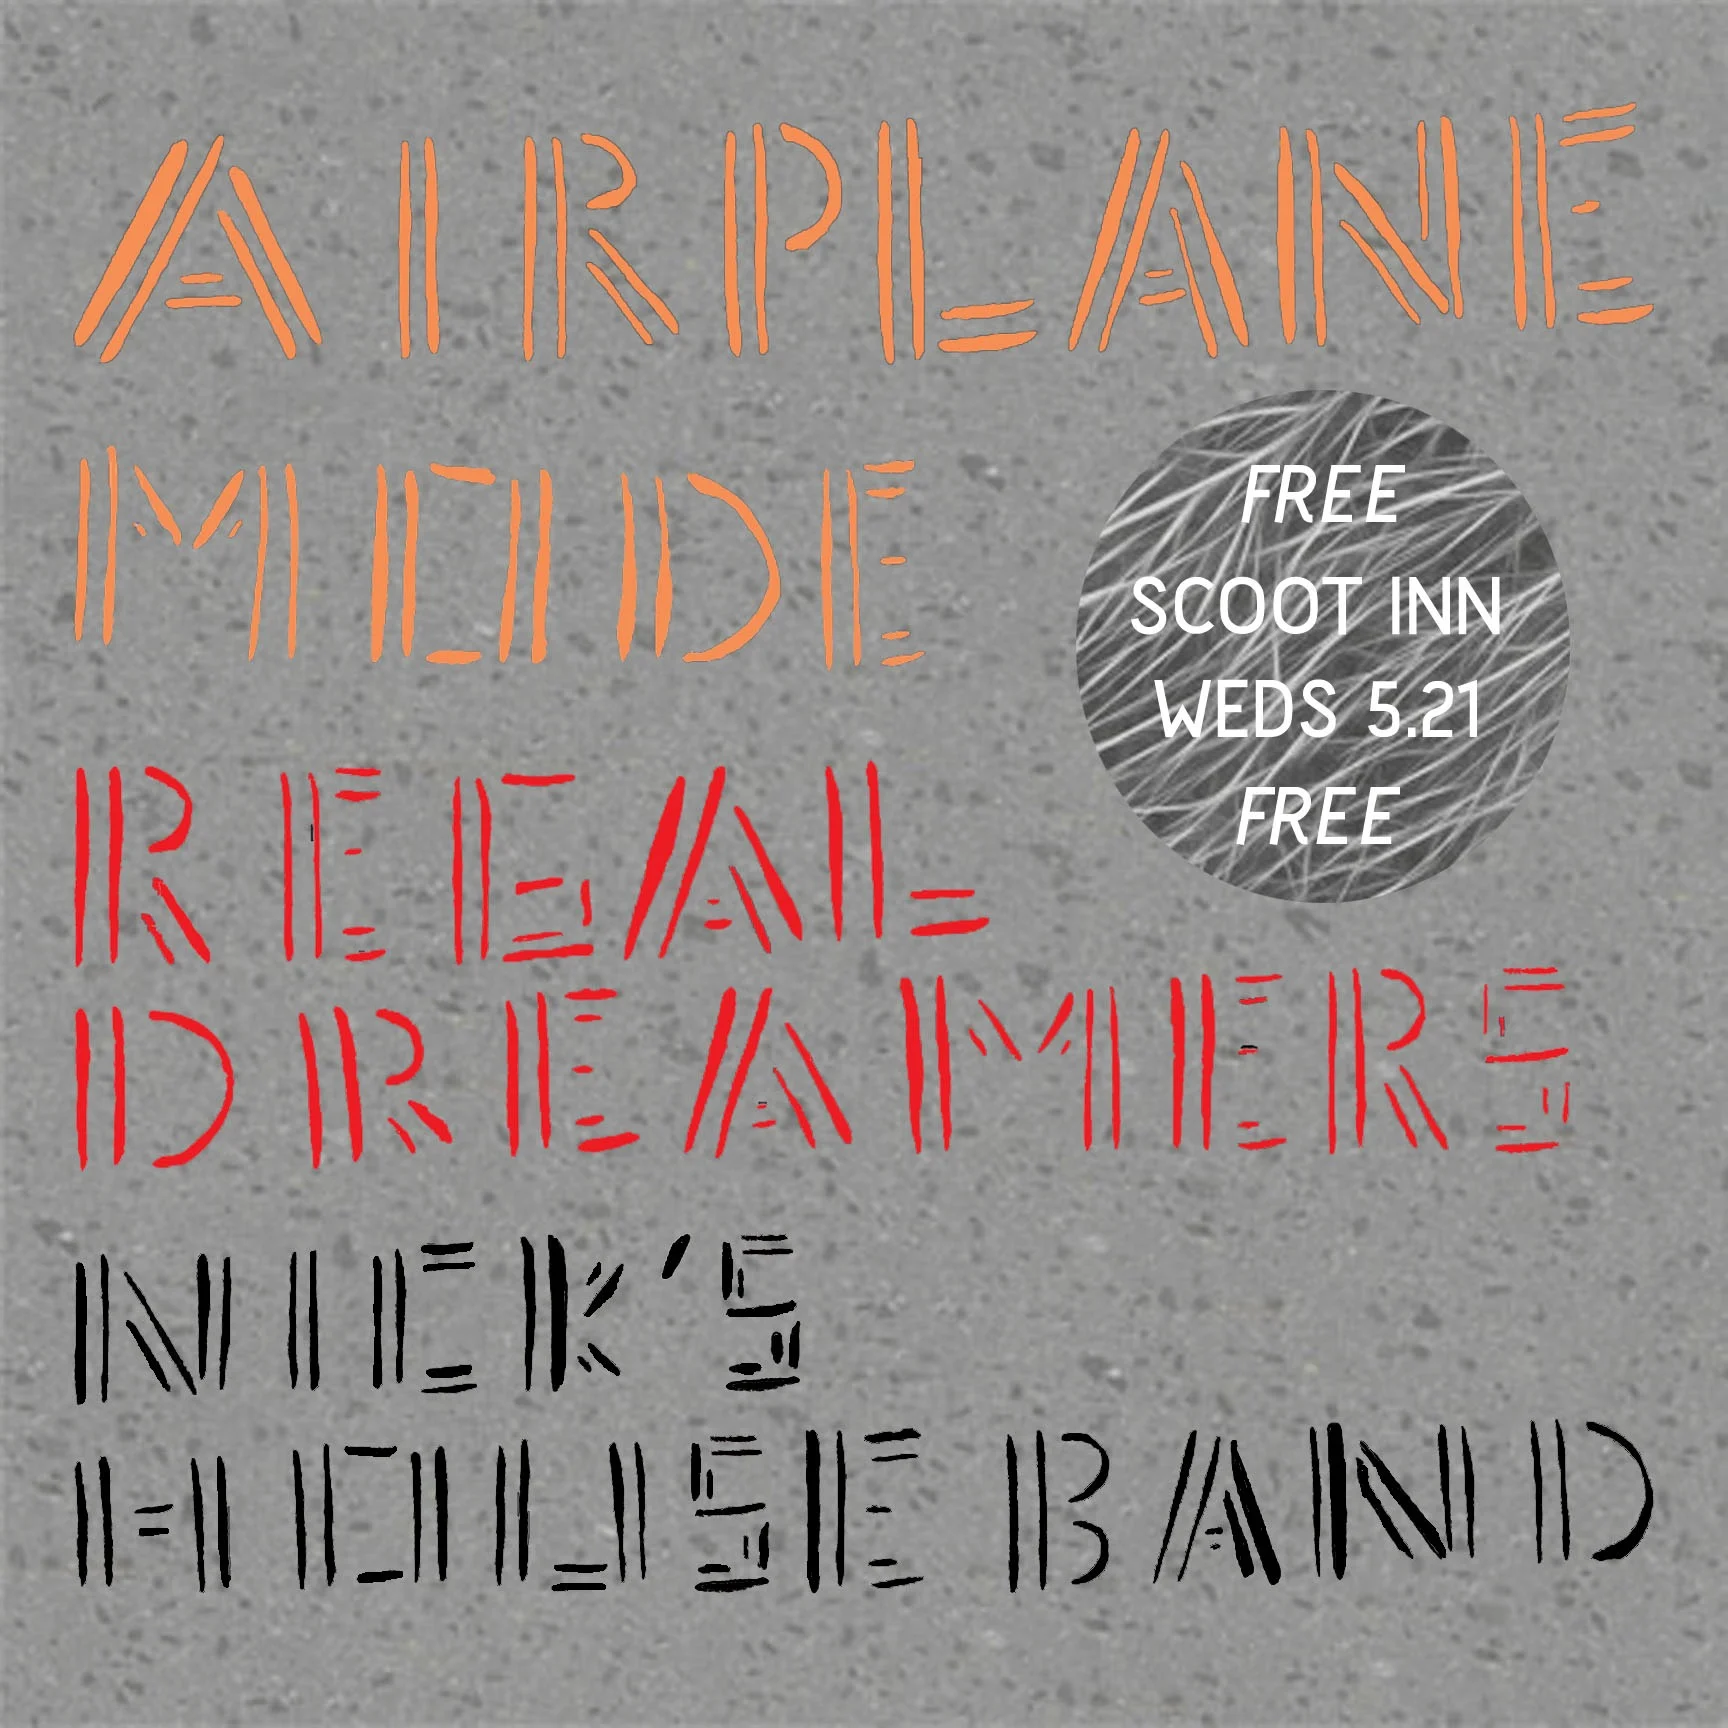 Airplane Mode, Regal Dreamers, Nick's House Band at Historic Scoot Inn